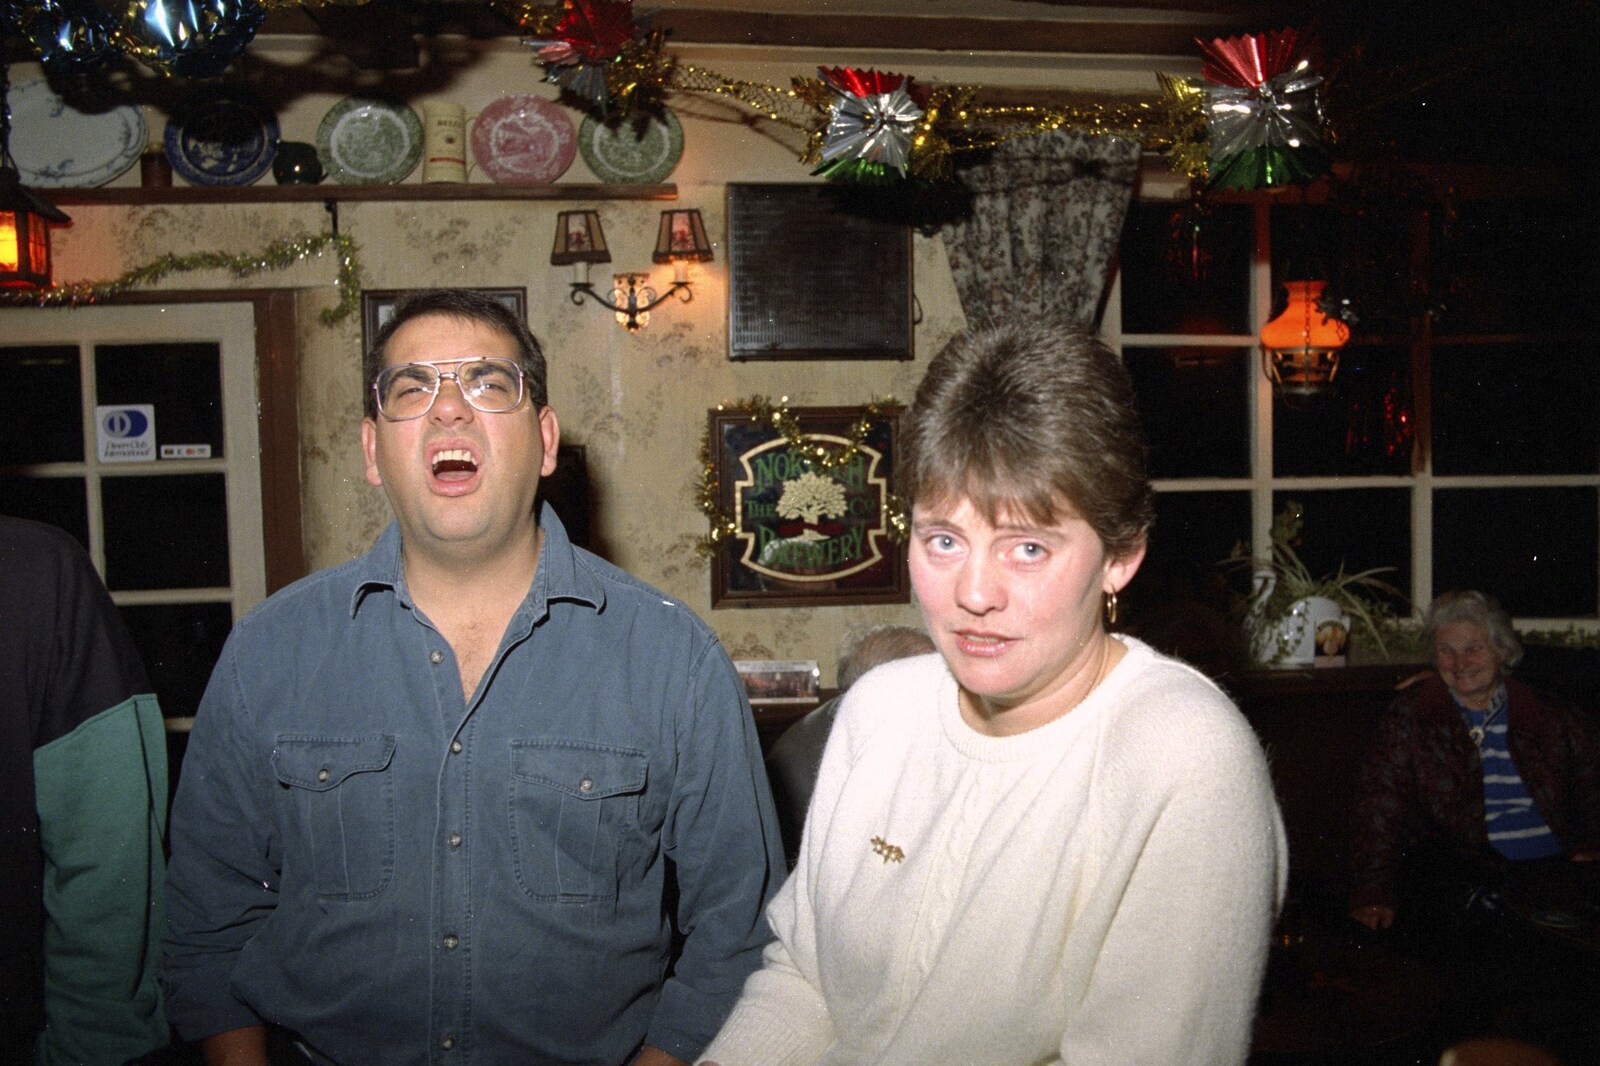 Roger Chapman pulls a bit of a face from New Year's Eve at the Swan Inn, Brome, Suffolk - 31st December 1994